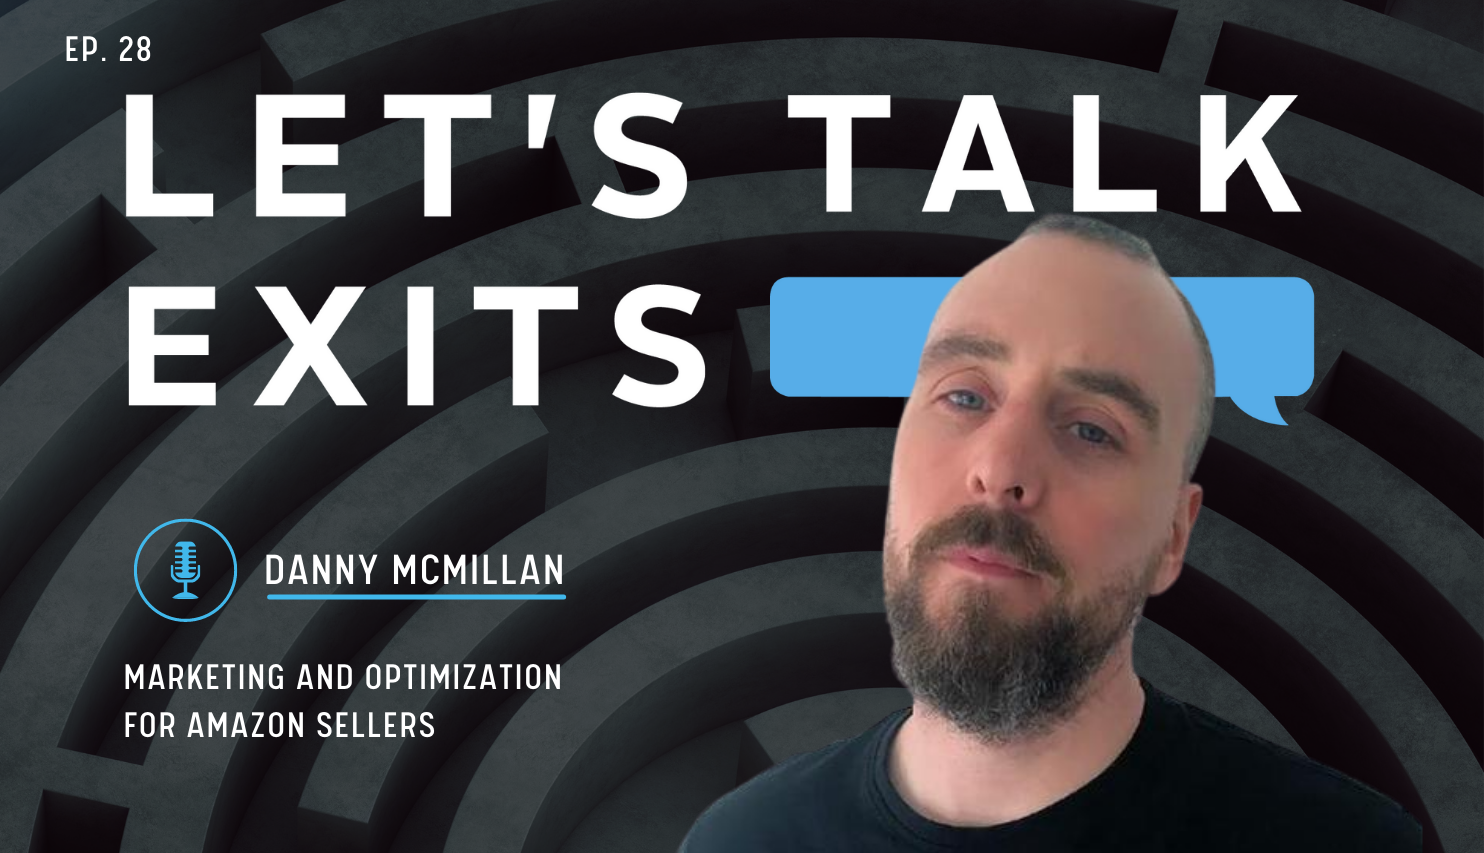 Marketing and Optimization for Amazon Sellers with Danny McMillan